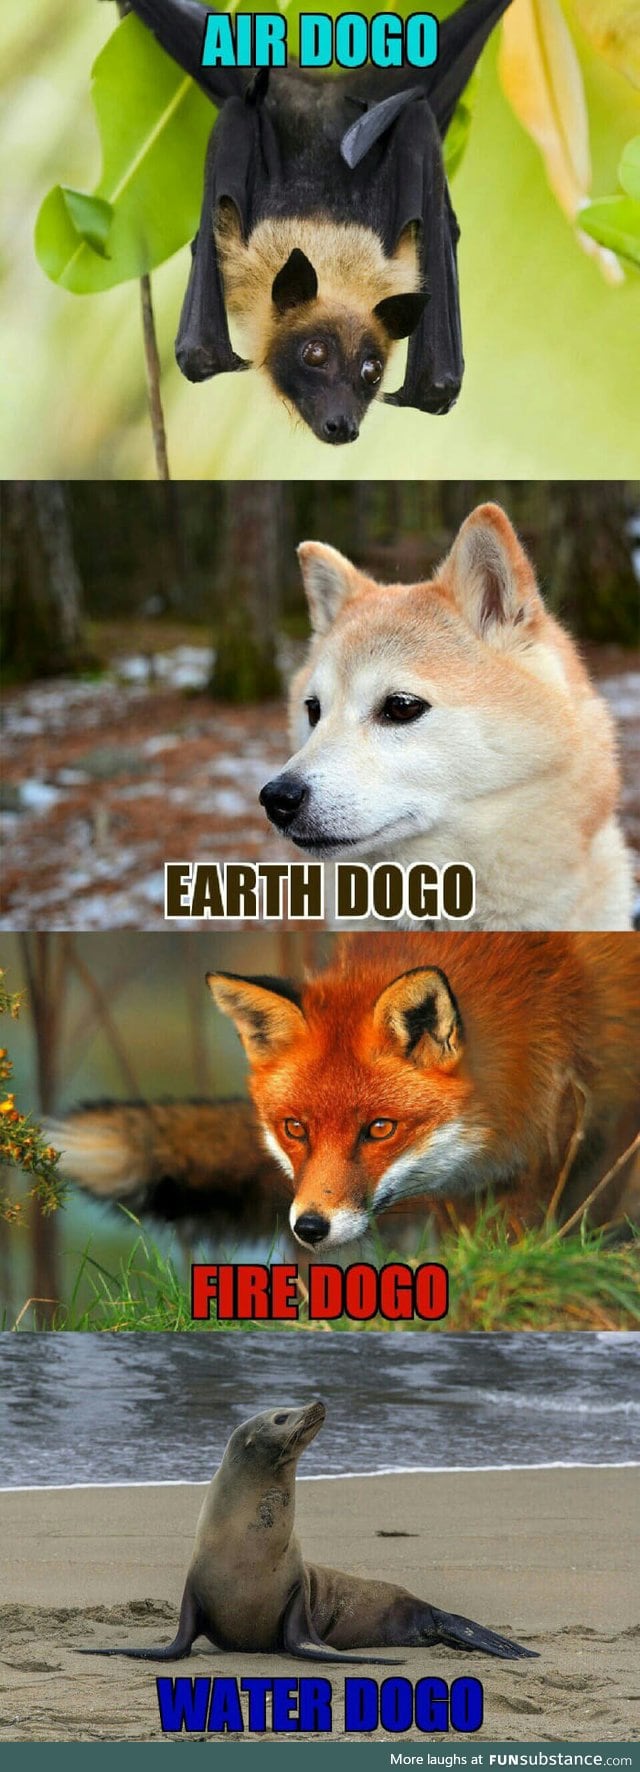 The element dogos